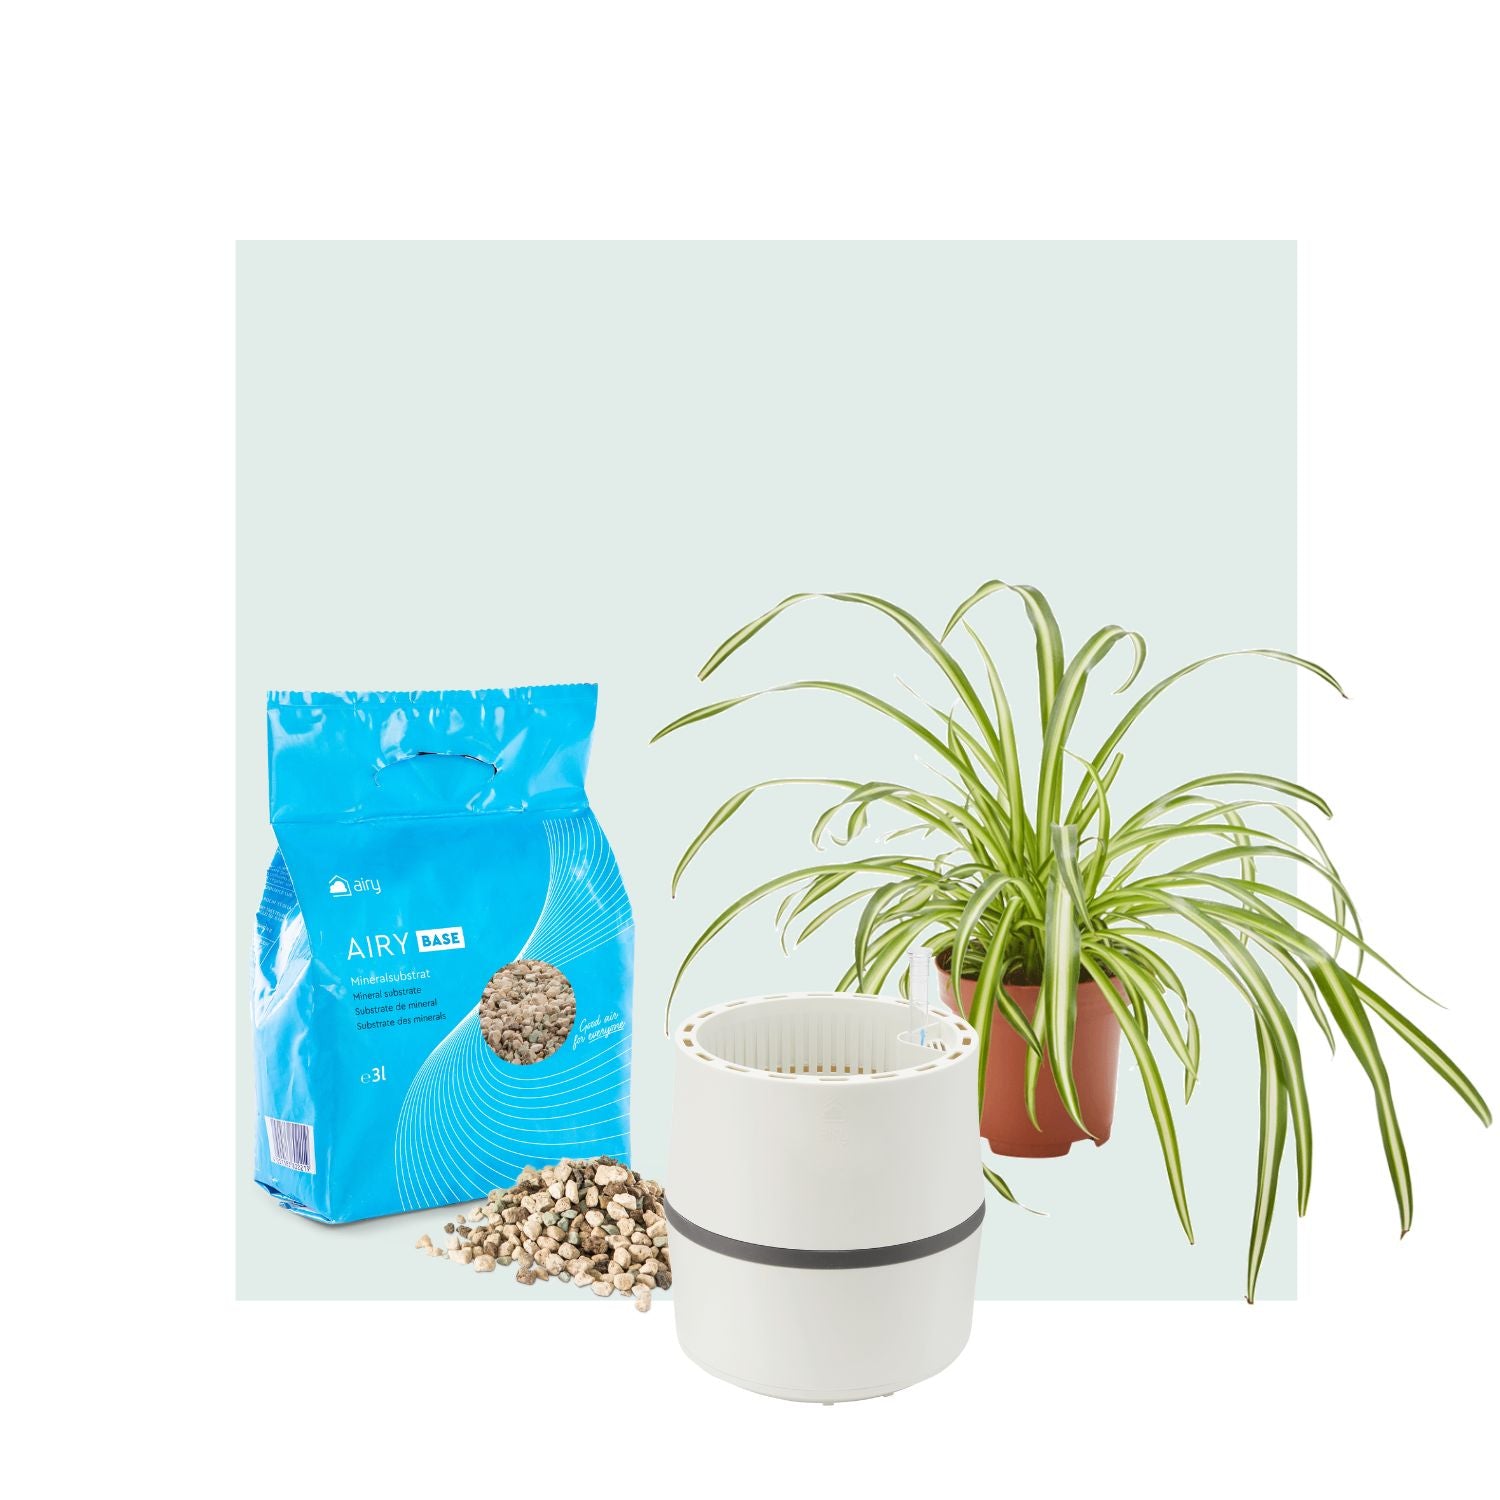 AIRY System S Spider Plant